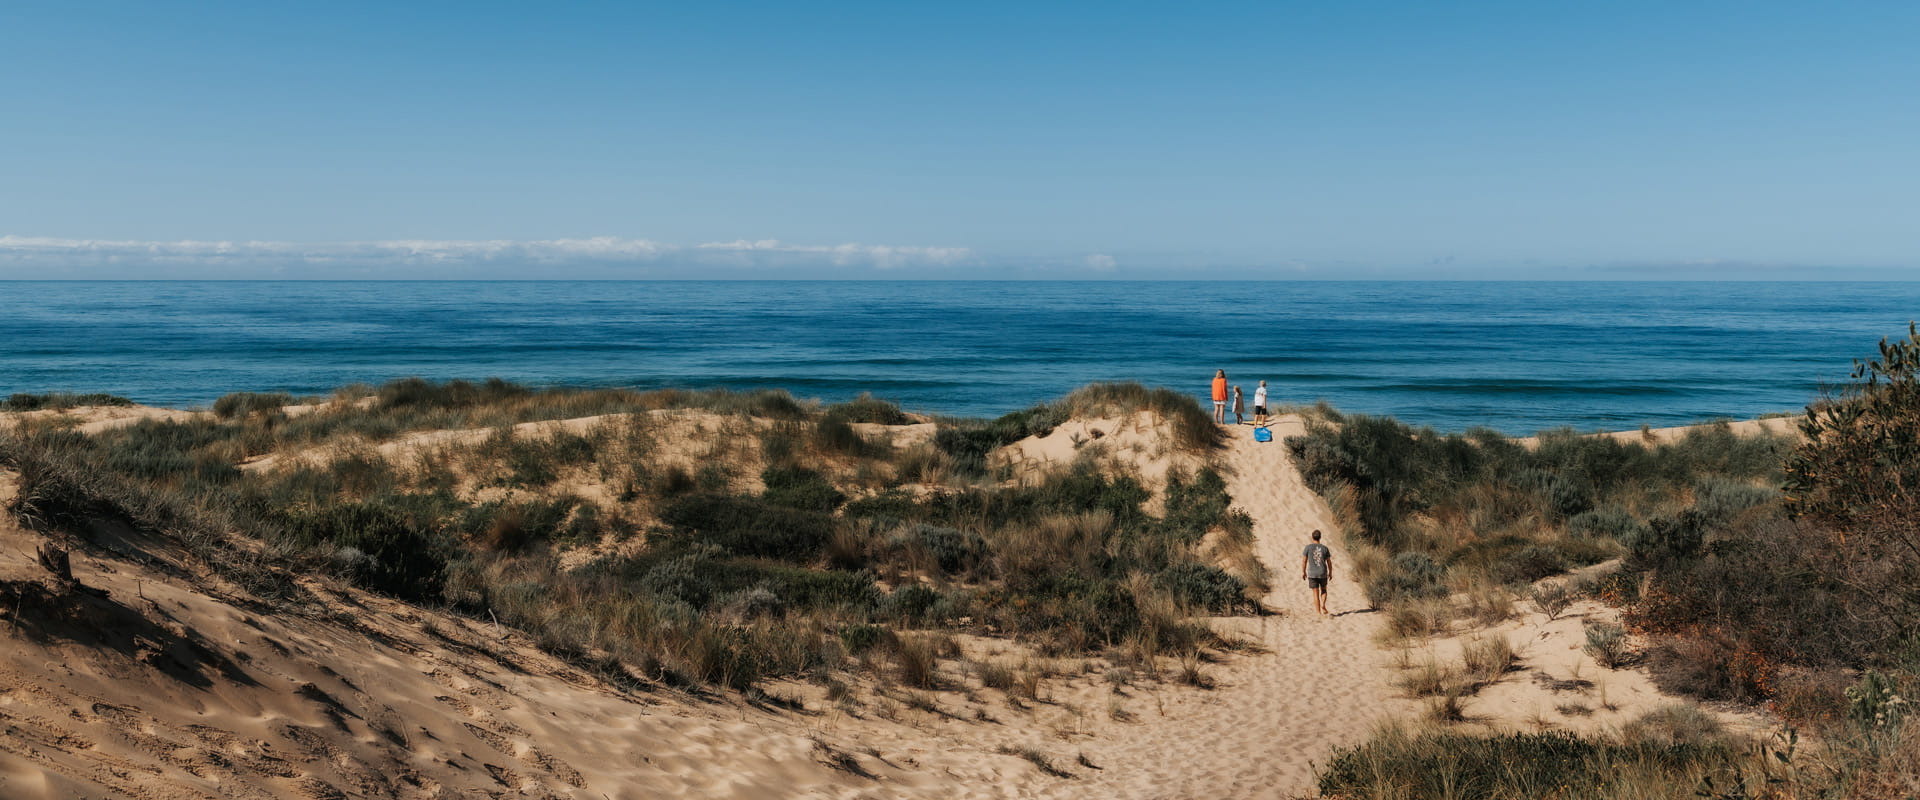 A father walks along a sandy dune path up to his wife and two young children as they stand overlooking the clear blue open waters beyond.